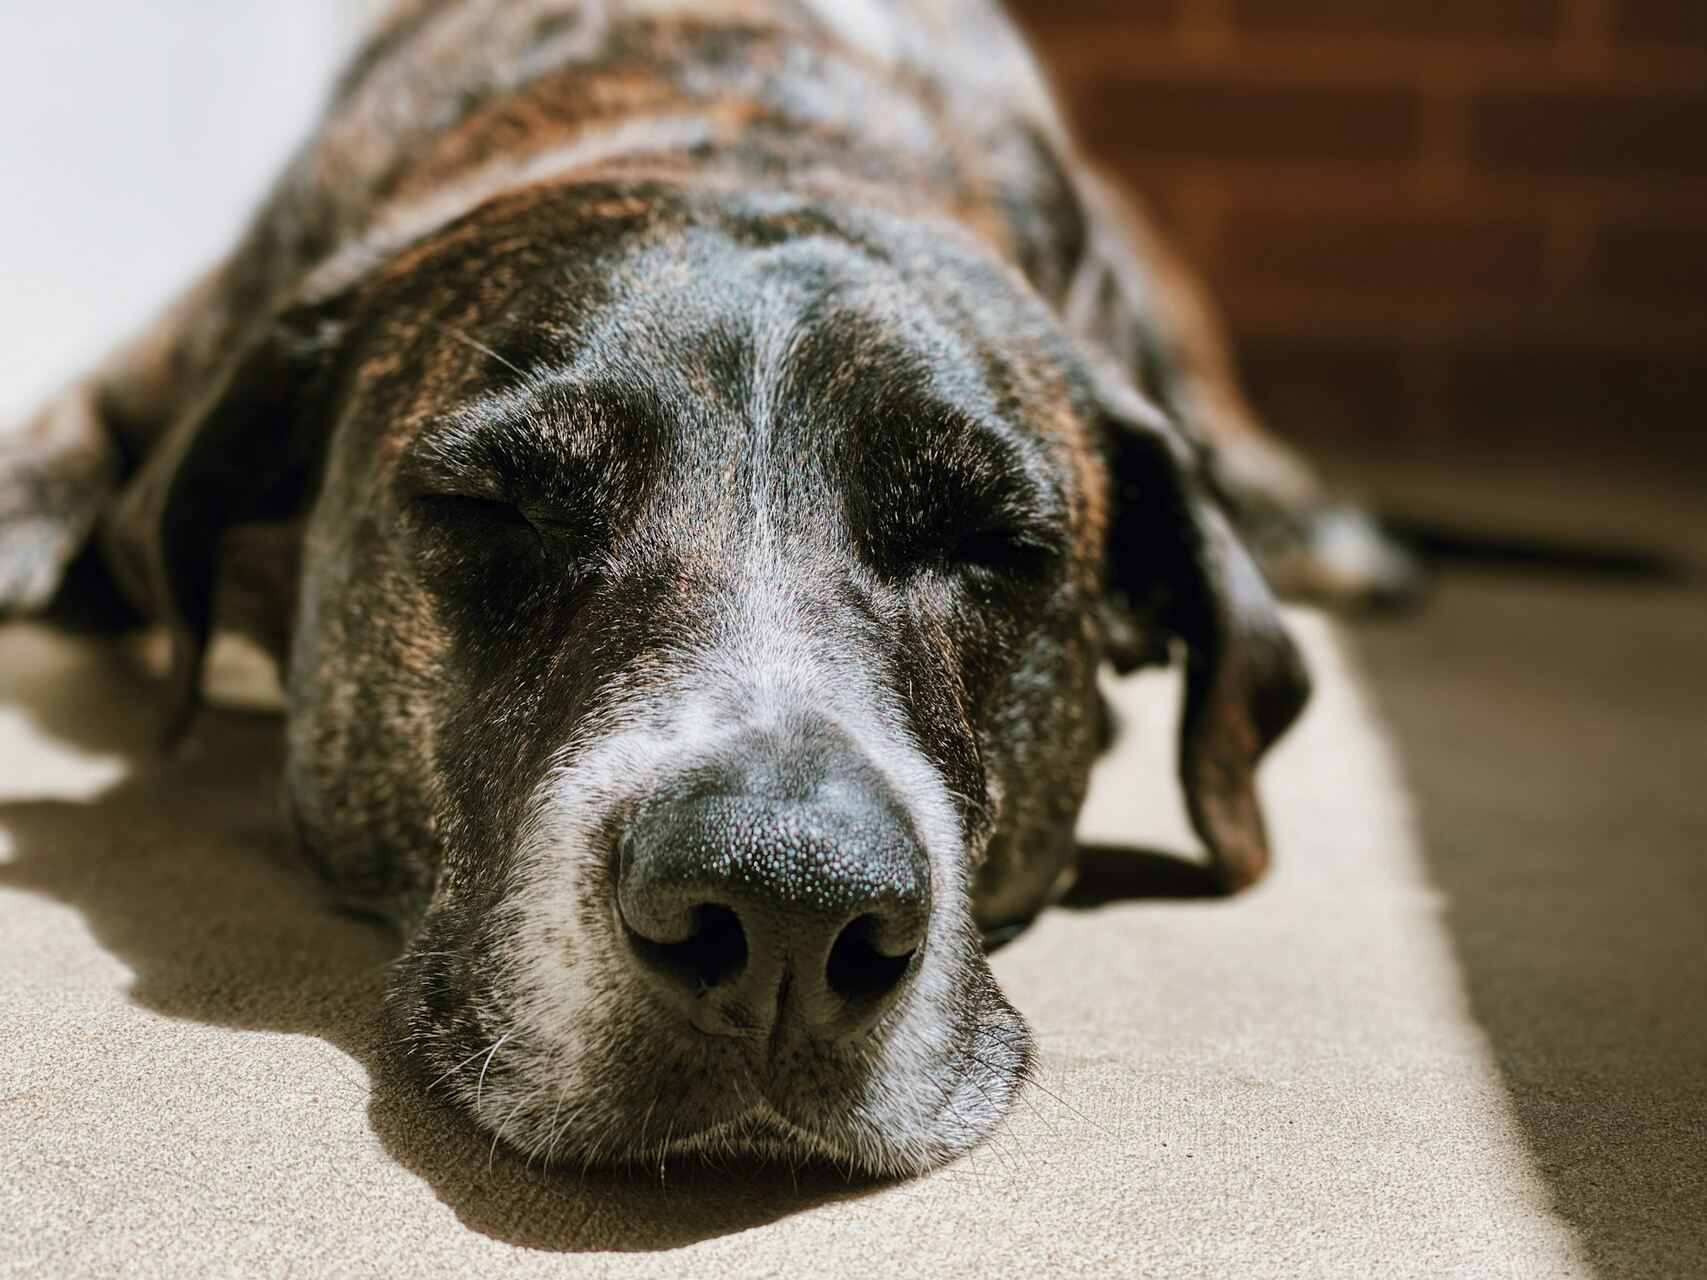 A senior dog napping in the sunlight indoors